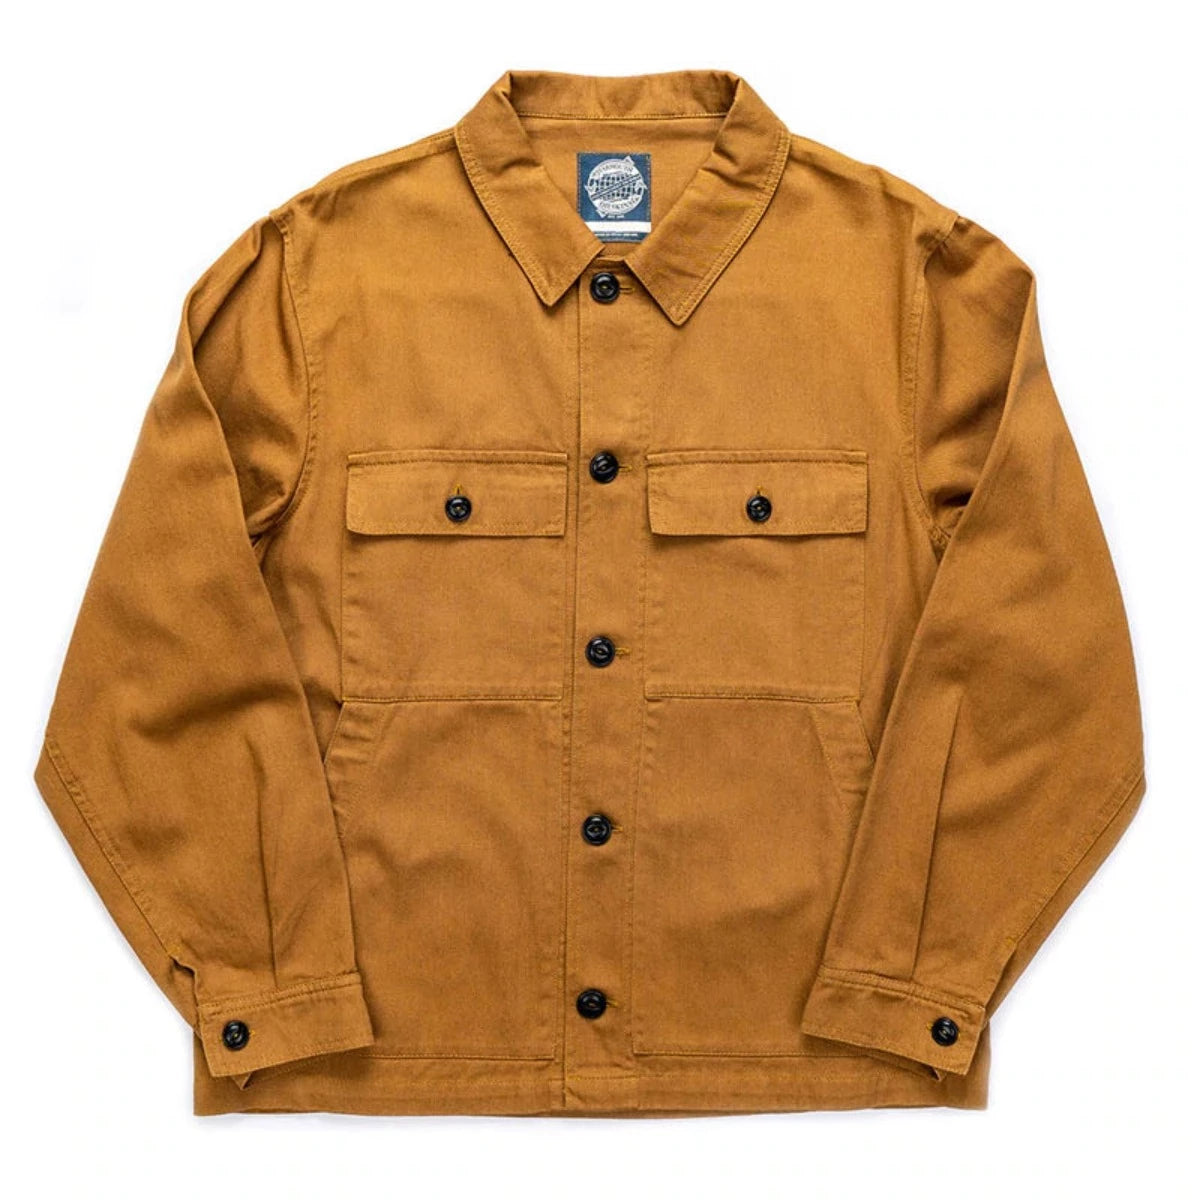 The Drivers Jacket from Yarmouth Oilskin is a short style jacket. A classic garment from times past. Originally popular in the 30's worn by Bus drivers in a very similar style and design. This particular jacket includes a shirt style collar